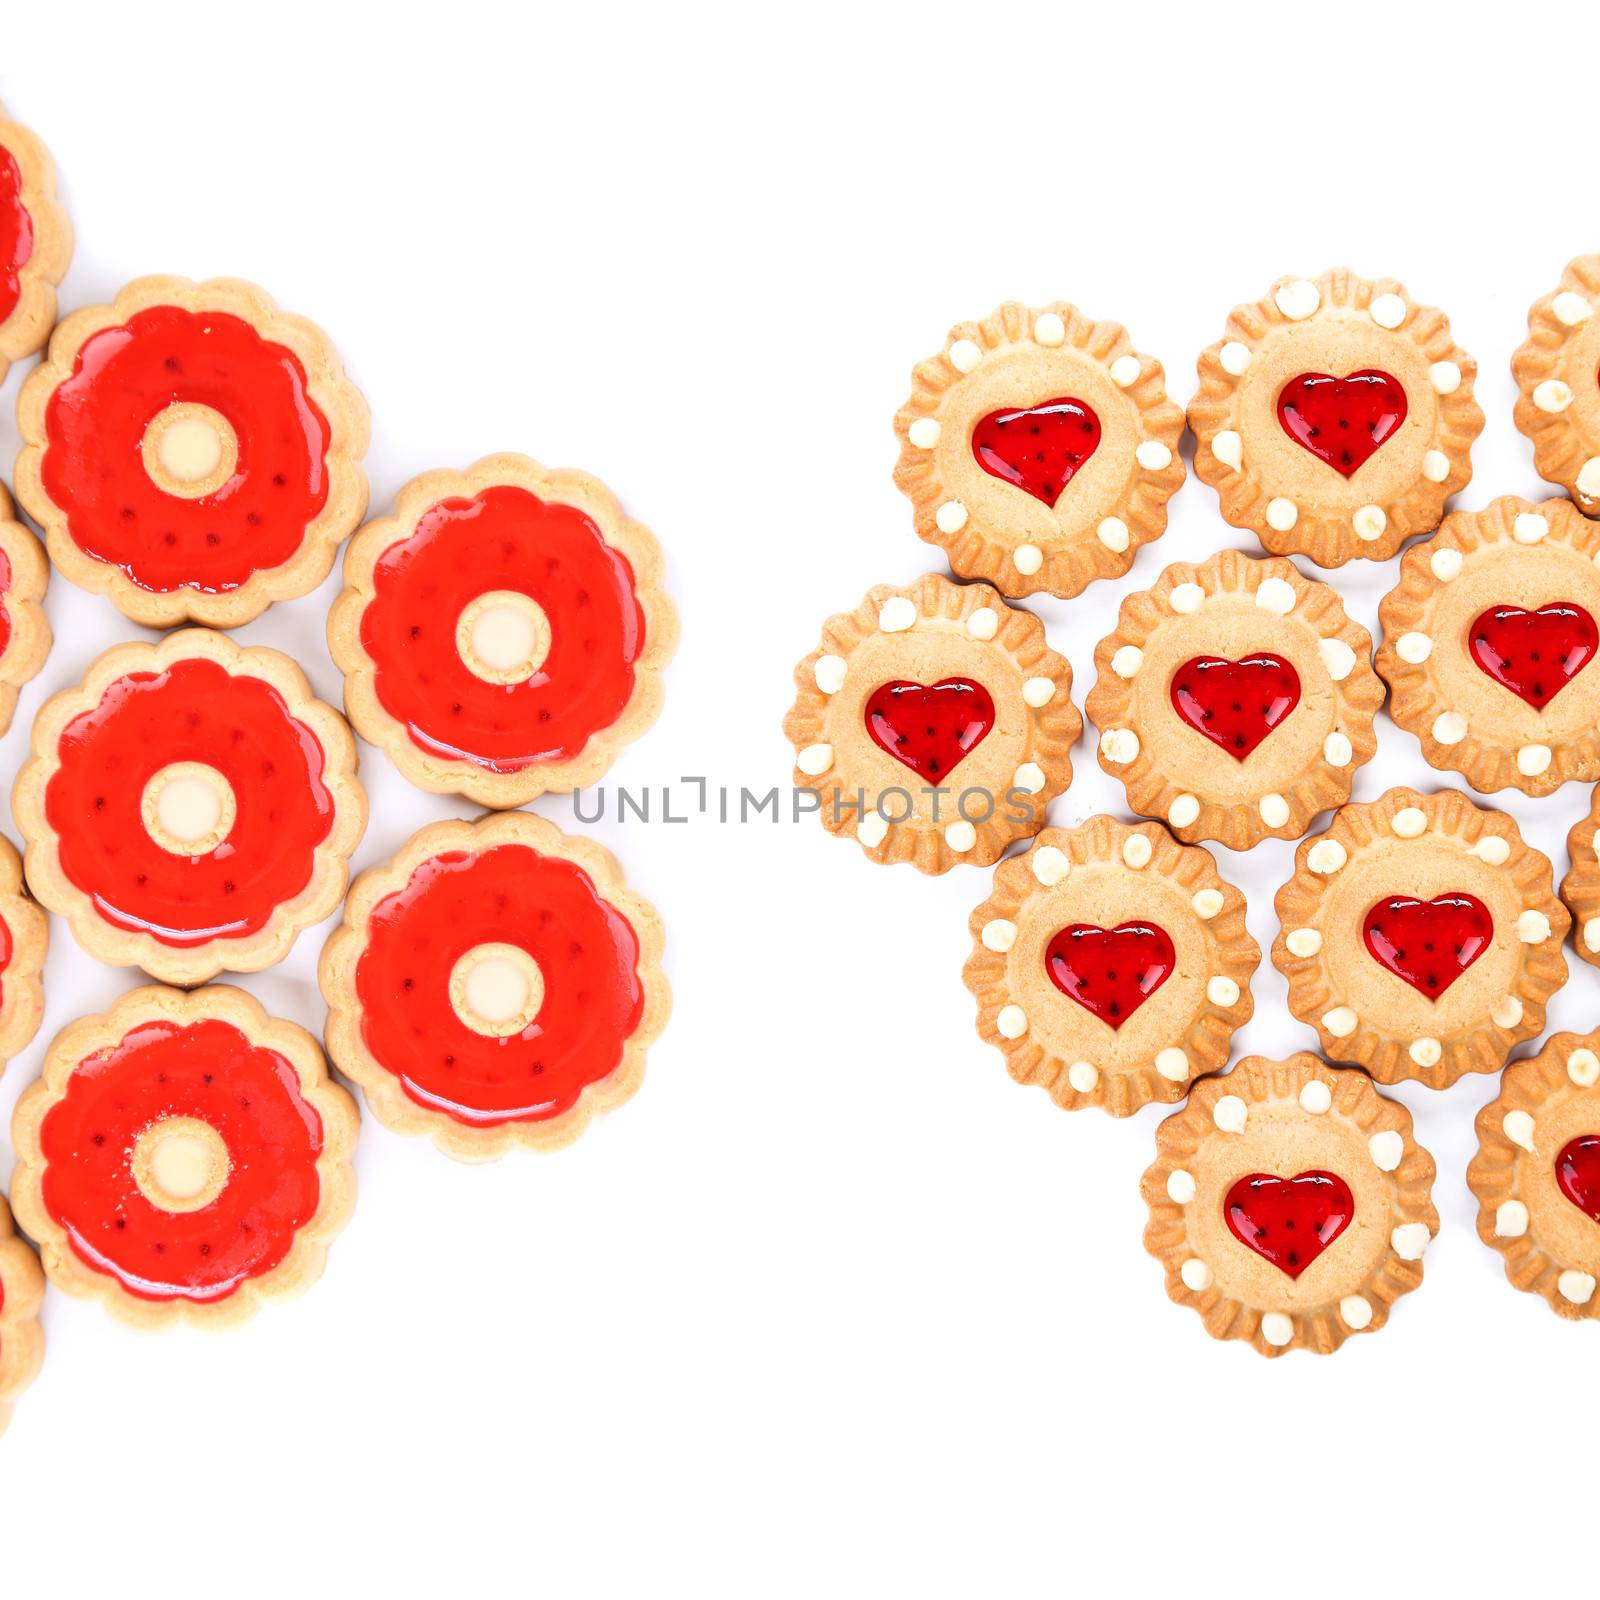 Heart and round shaped strawberry biscuits. White background.